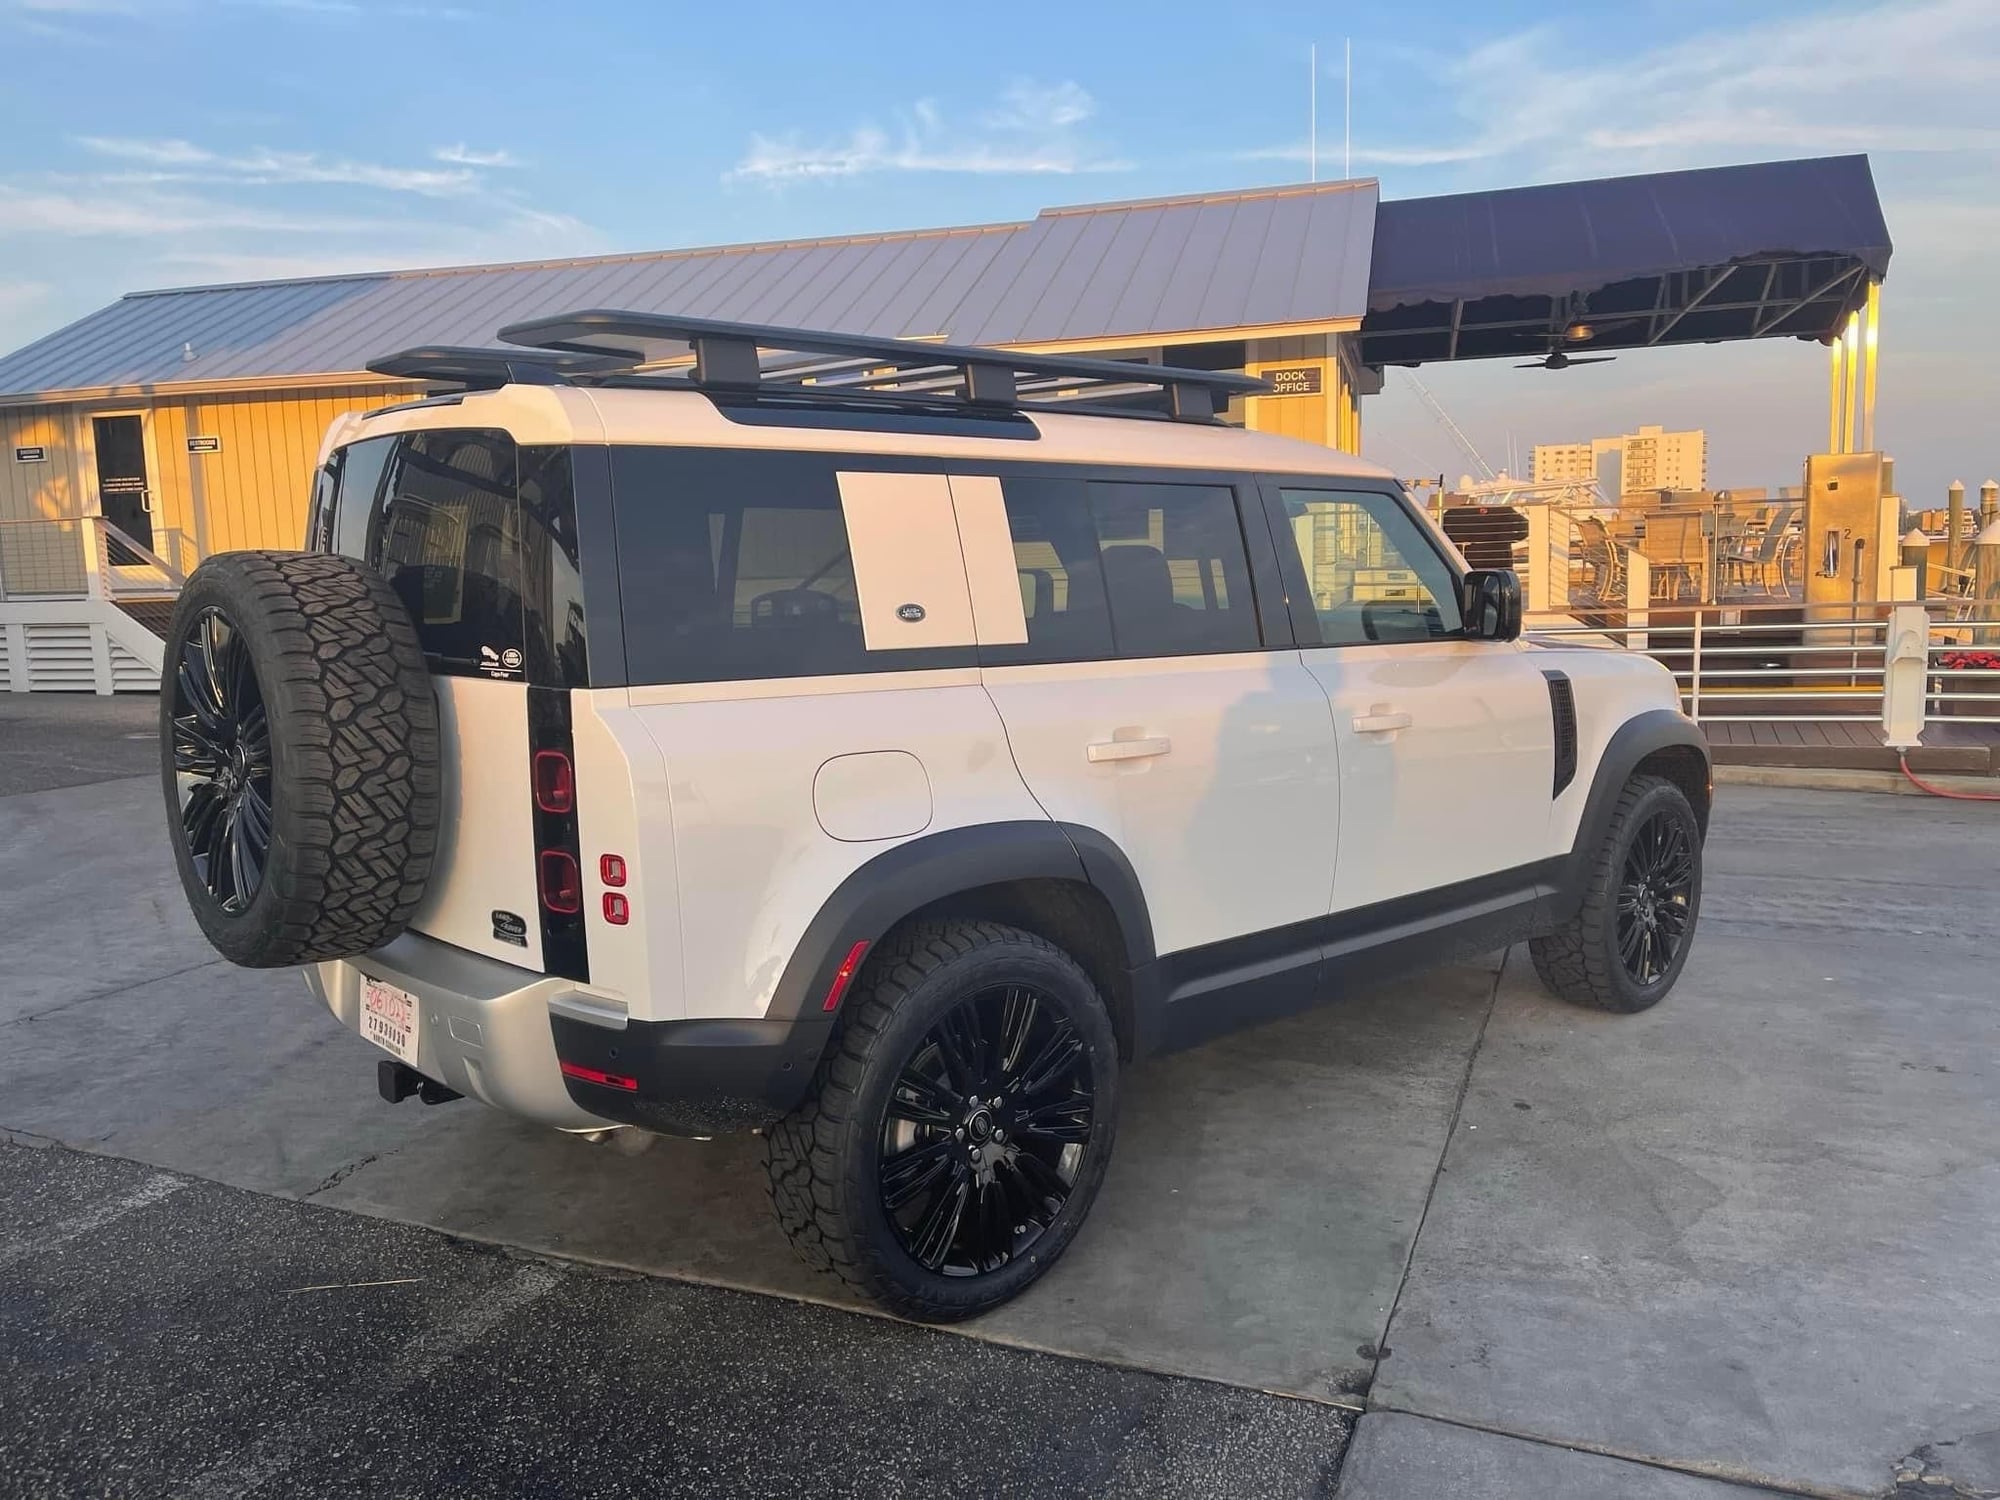 Wheels and Tires/Axles - 5 9012 range rover 22in wheels and Nitto AT Tires - Used - 2019 to 2023 Land Rover Defender - 2005 to 2023 Land Rover Range Rover - 2005 to 2023 Land Rover Range Rover Sport - Wilmington, NC 28403, United States